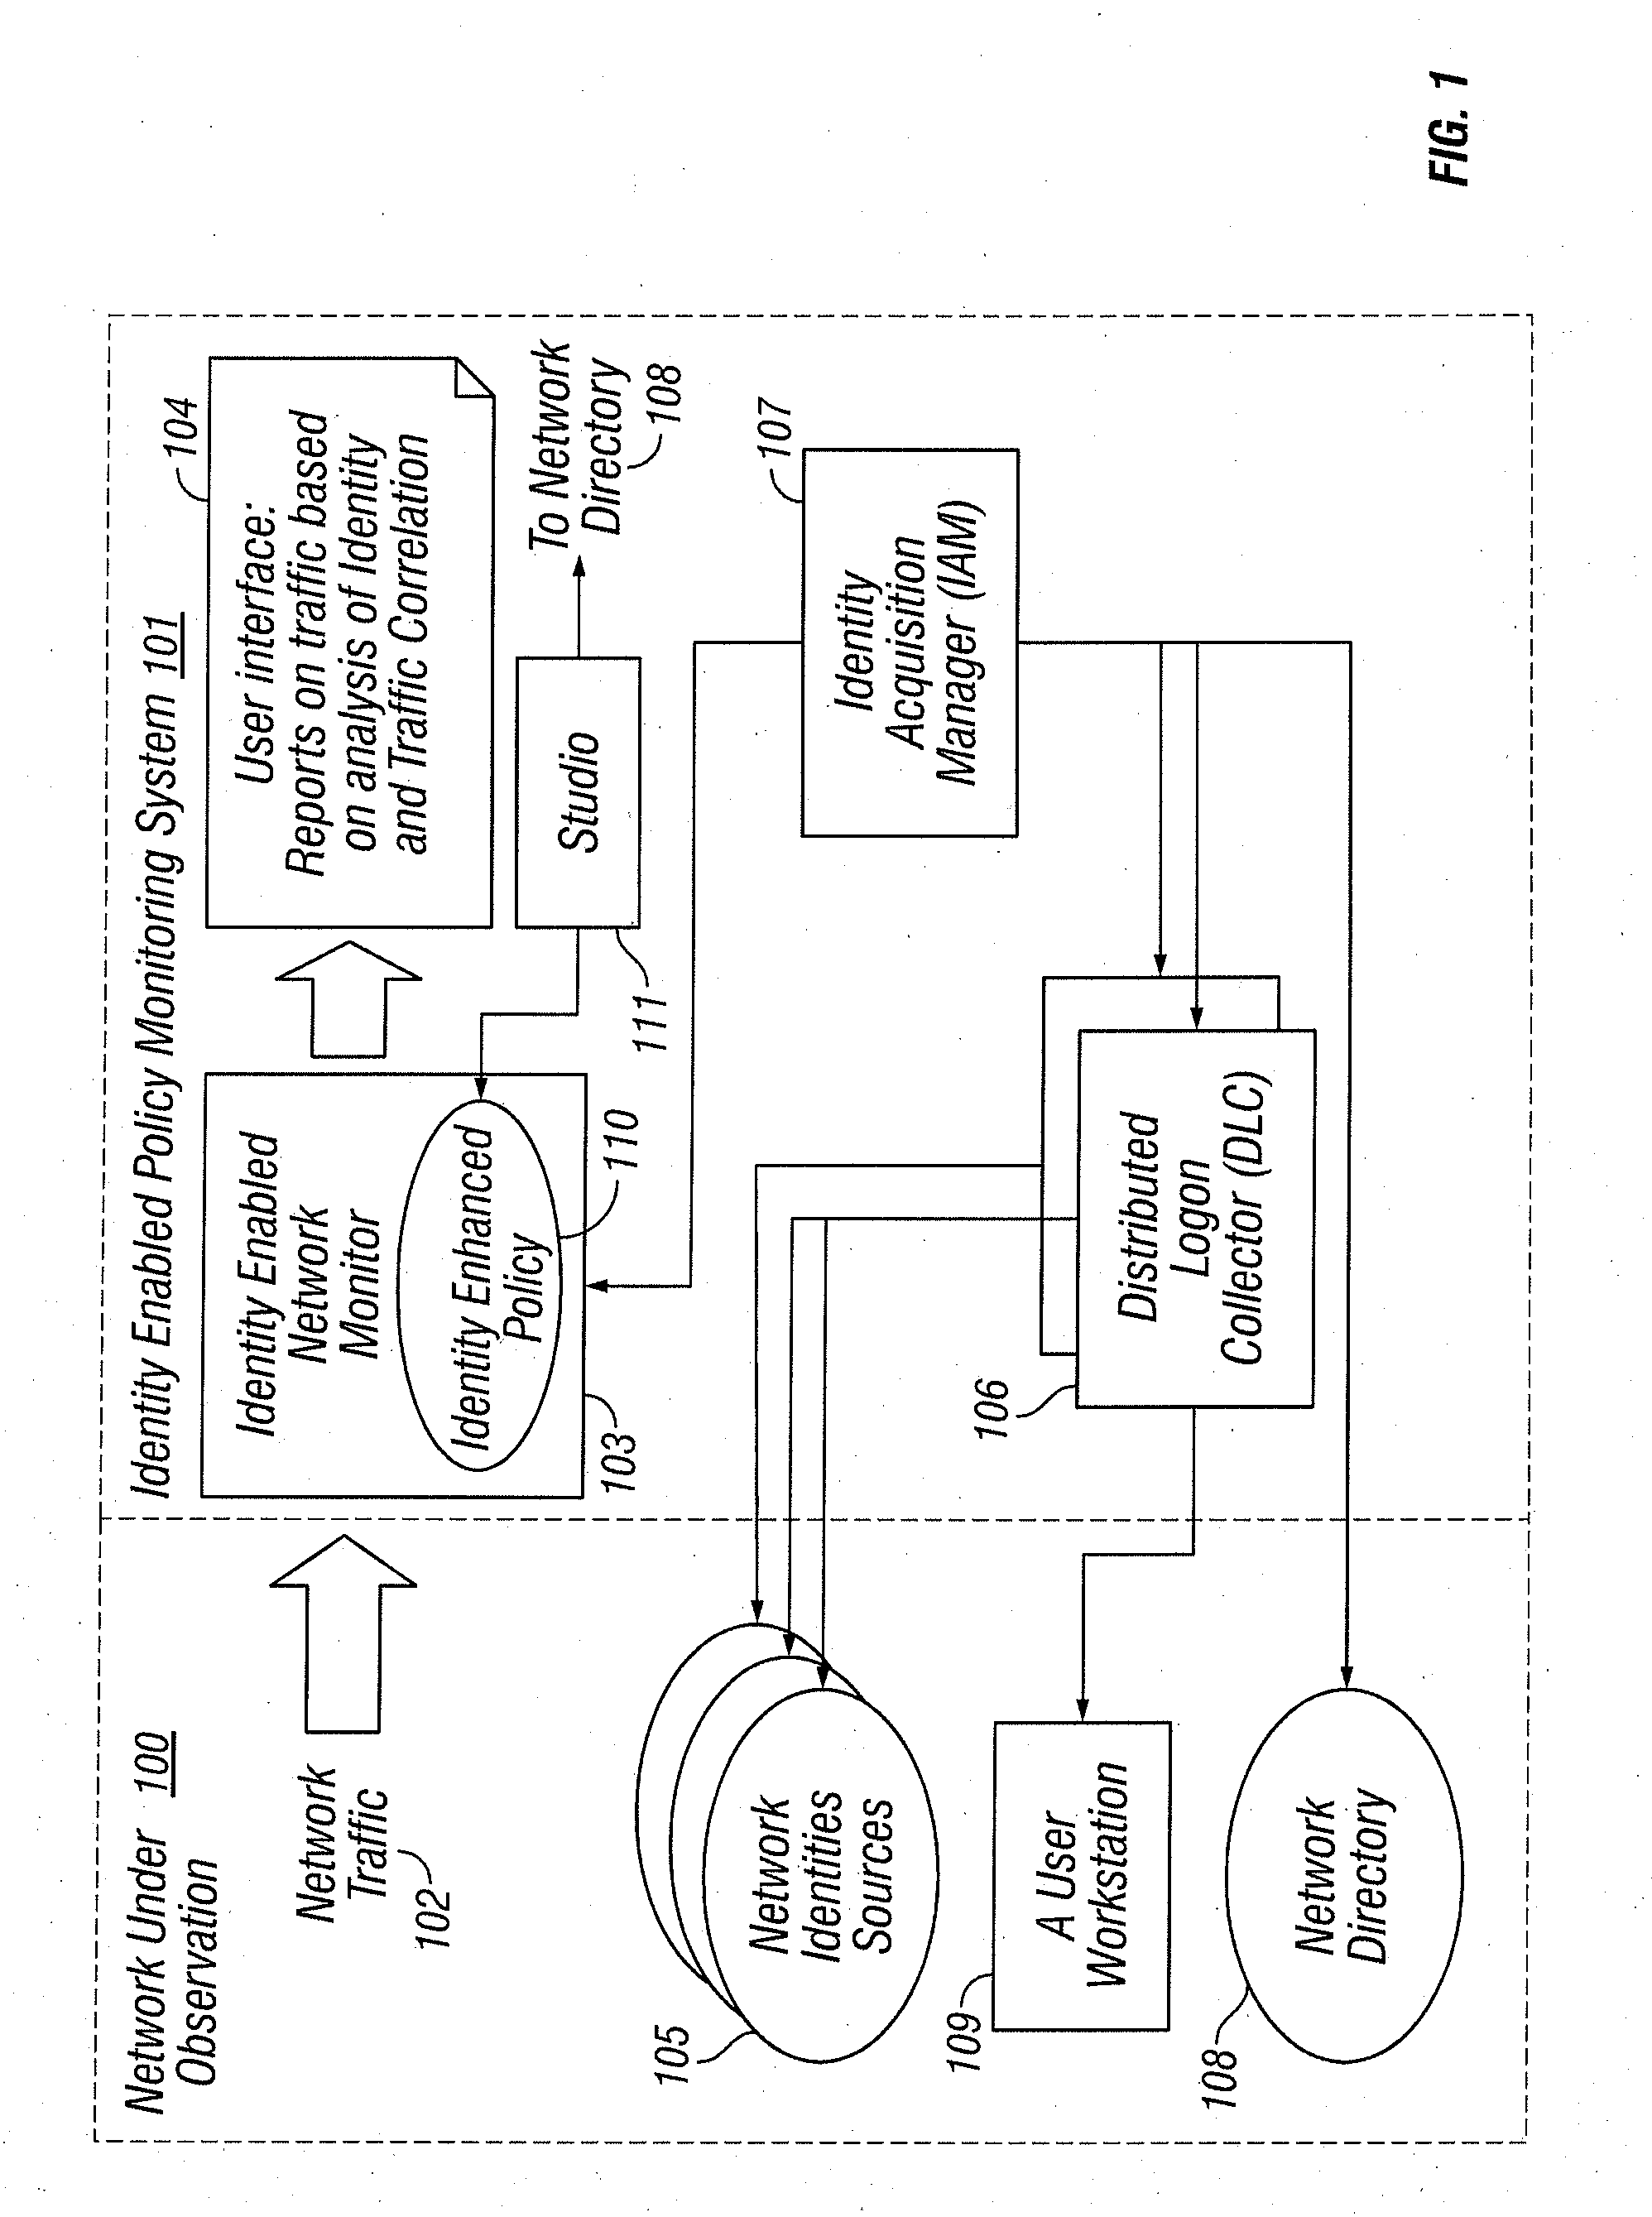 Identities Correlation Infrastructure for Passive Network Monitoring